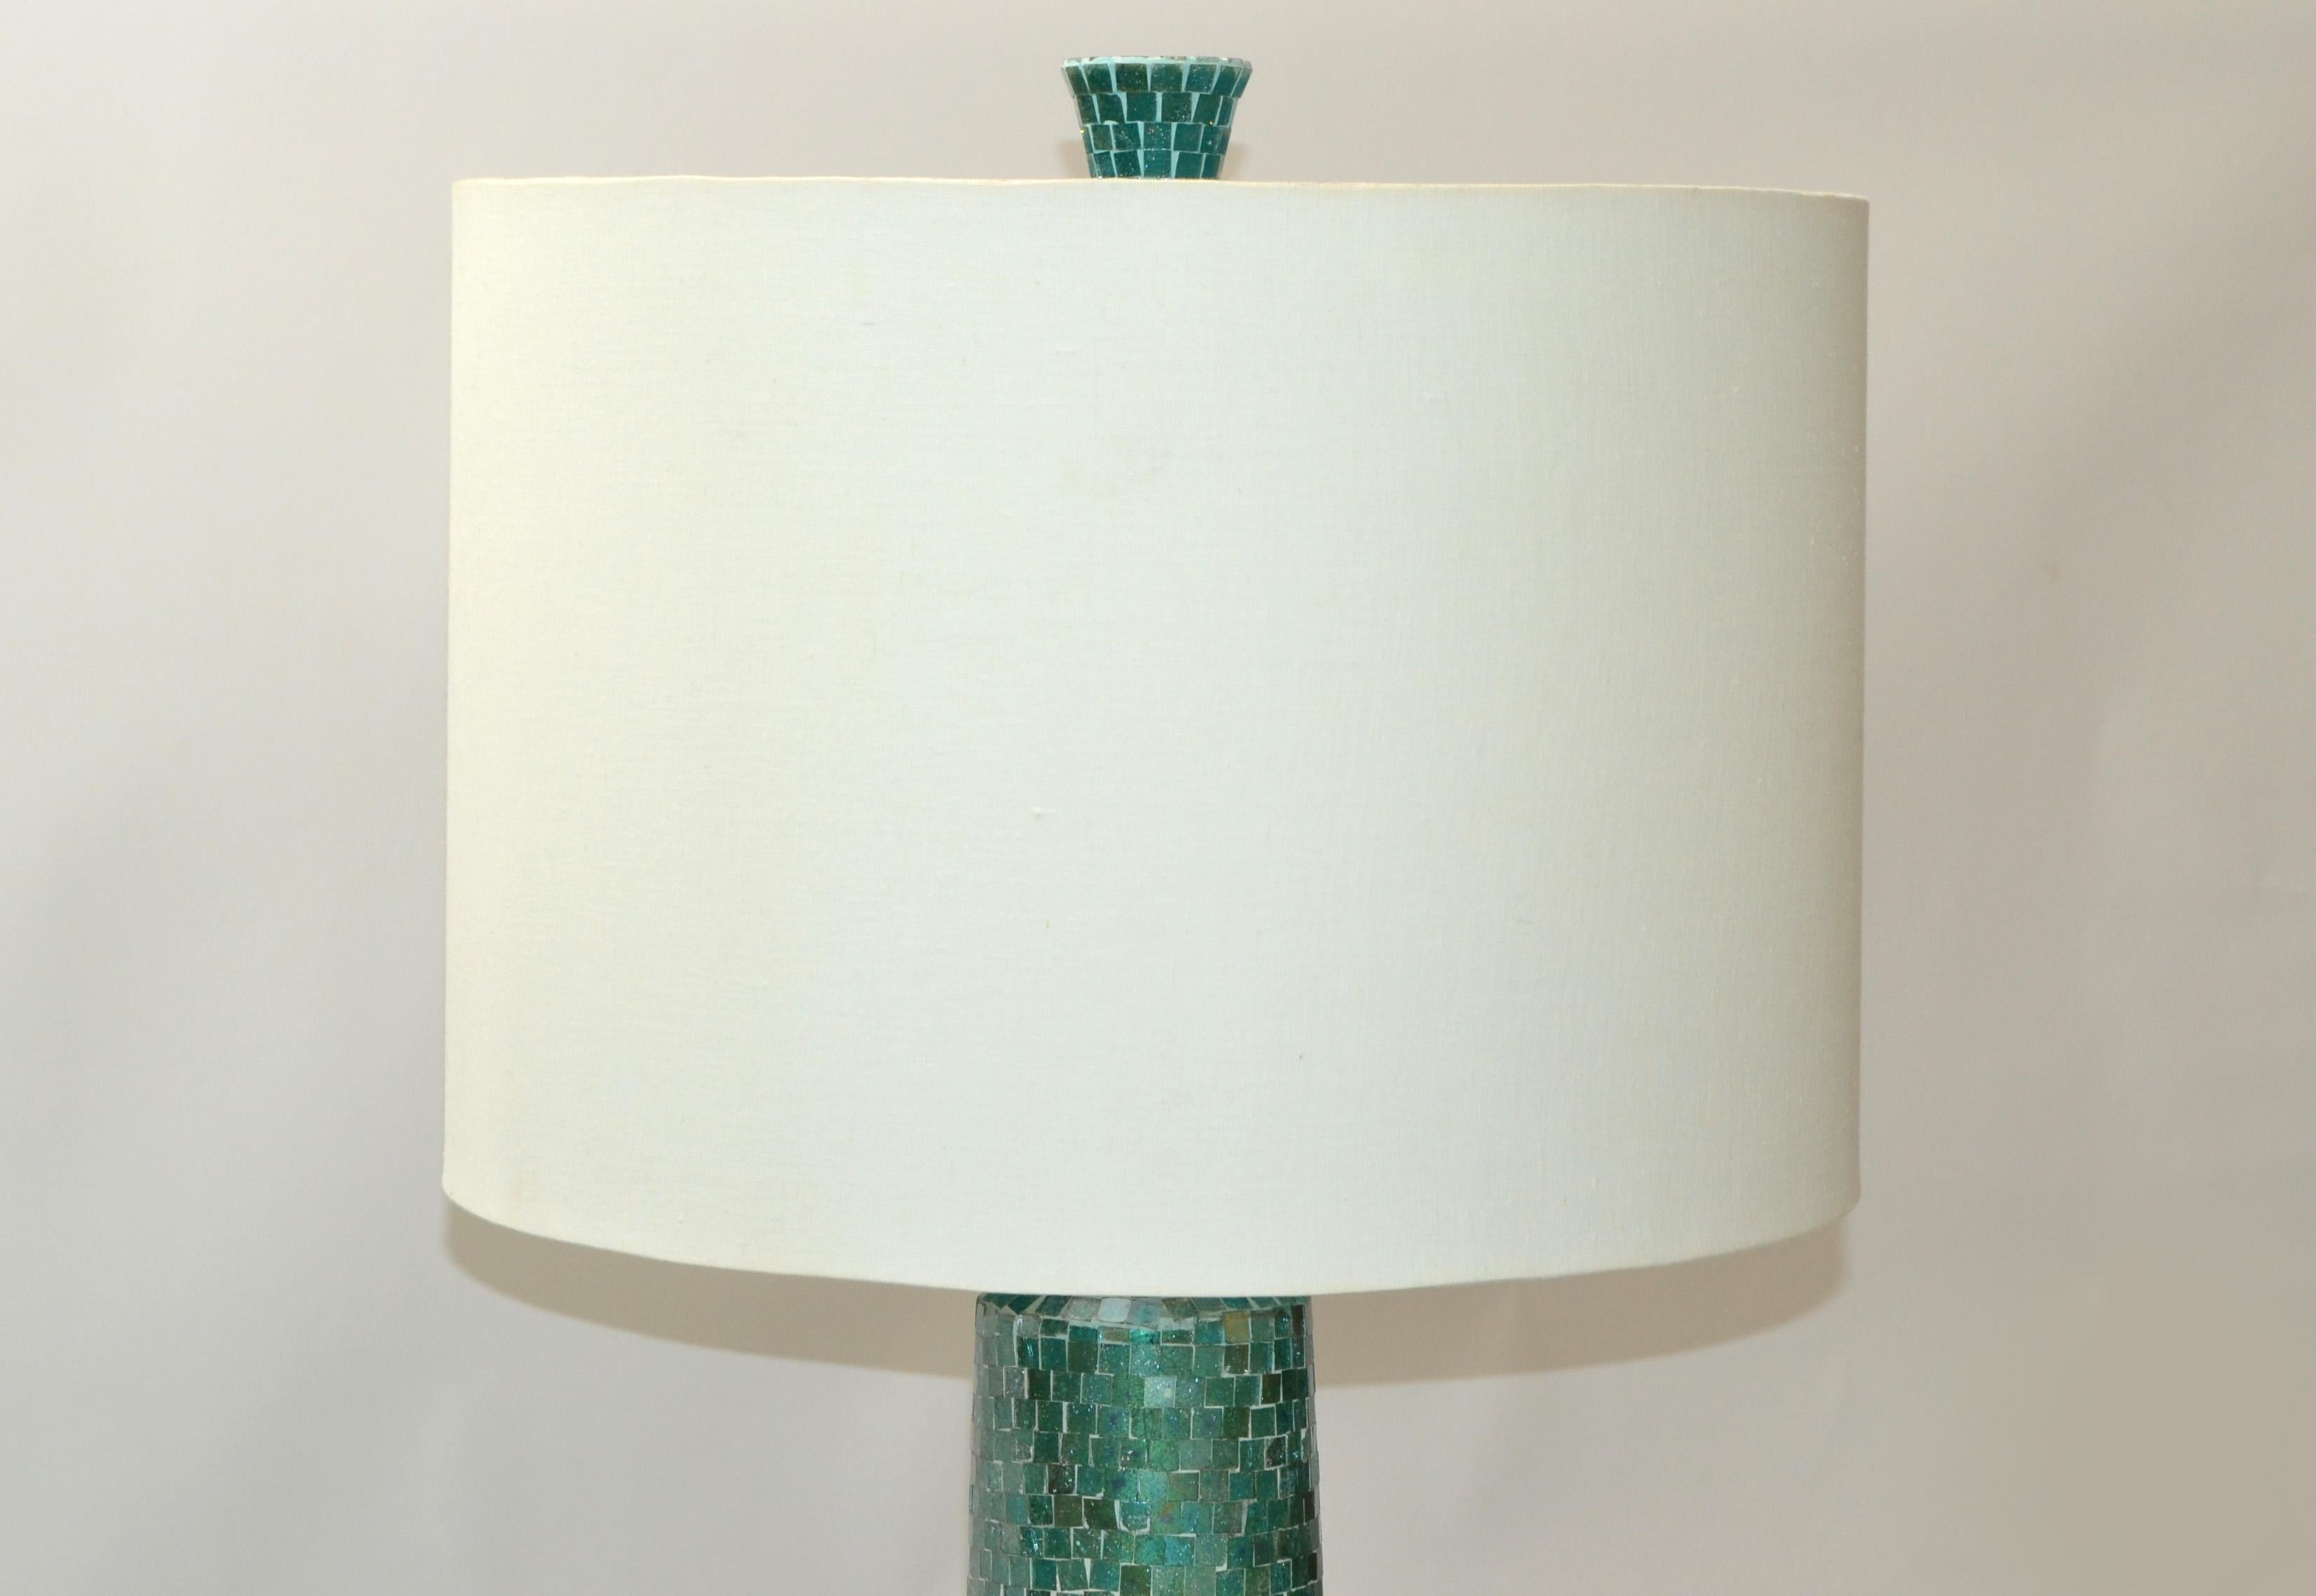 Fabric 1970, Mosaic Glass over Wood Turquoise & Green Floor Lamp White Mint Drum Shade 